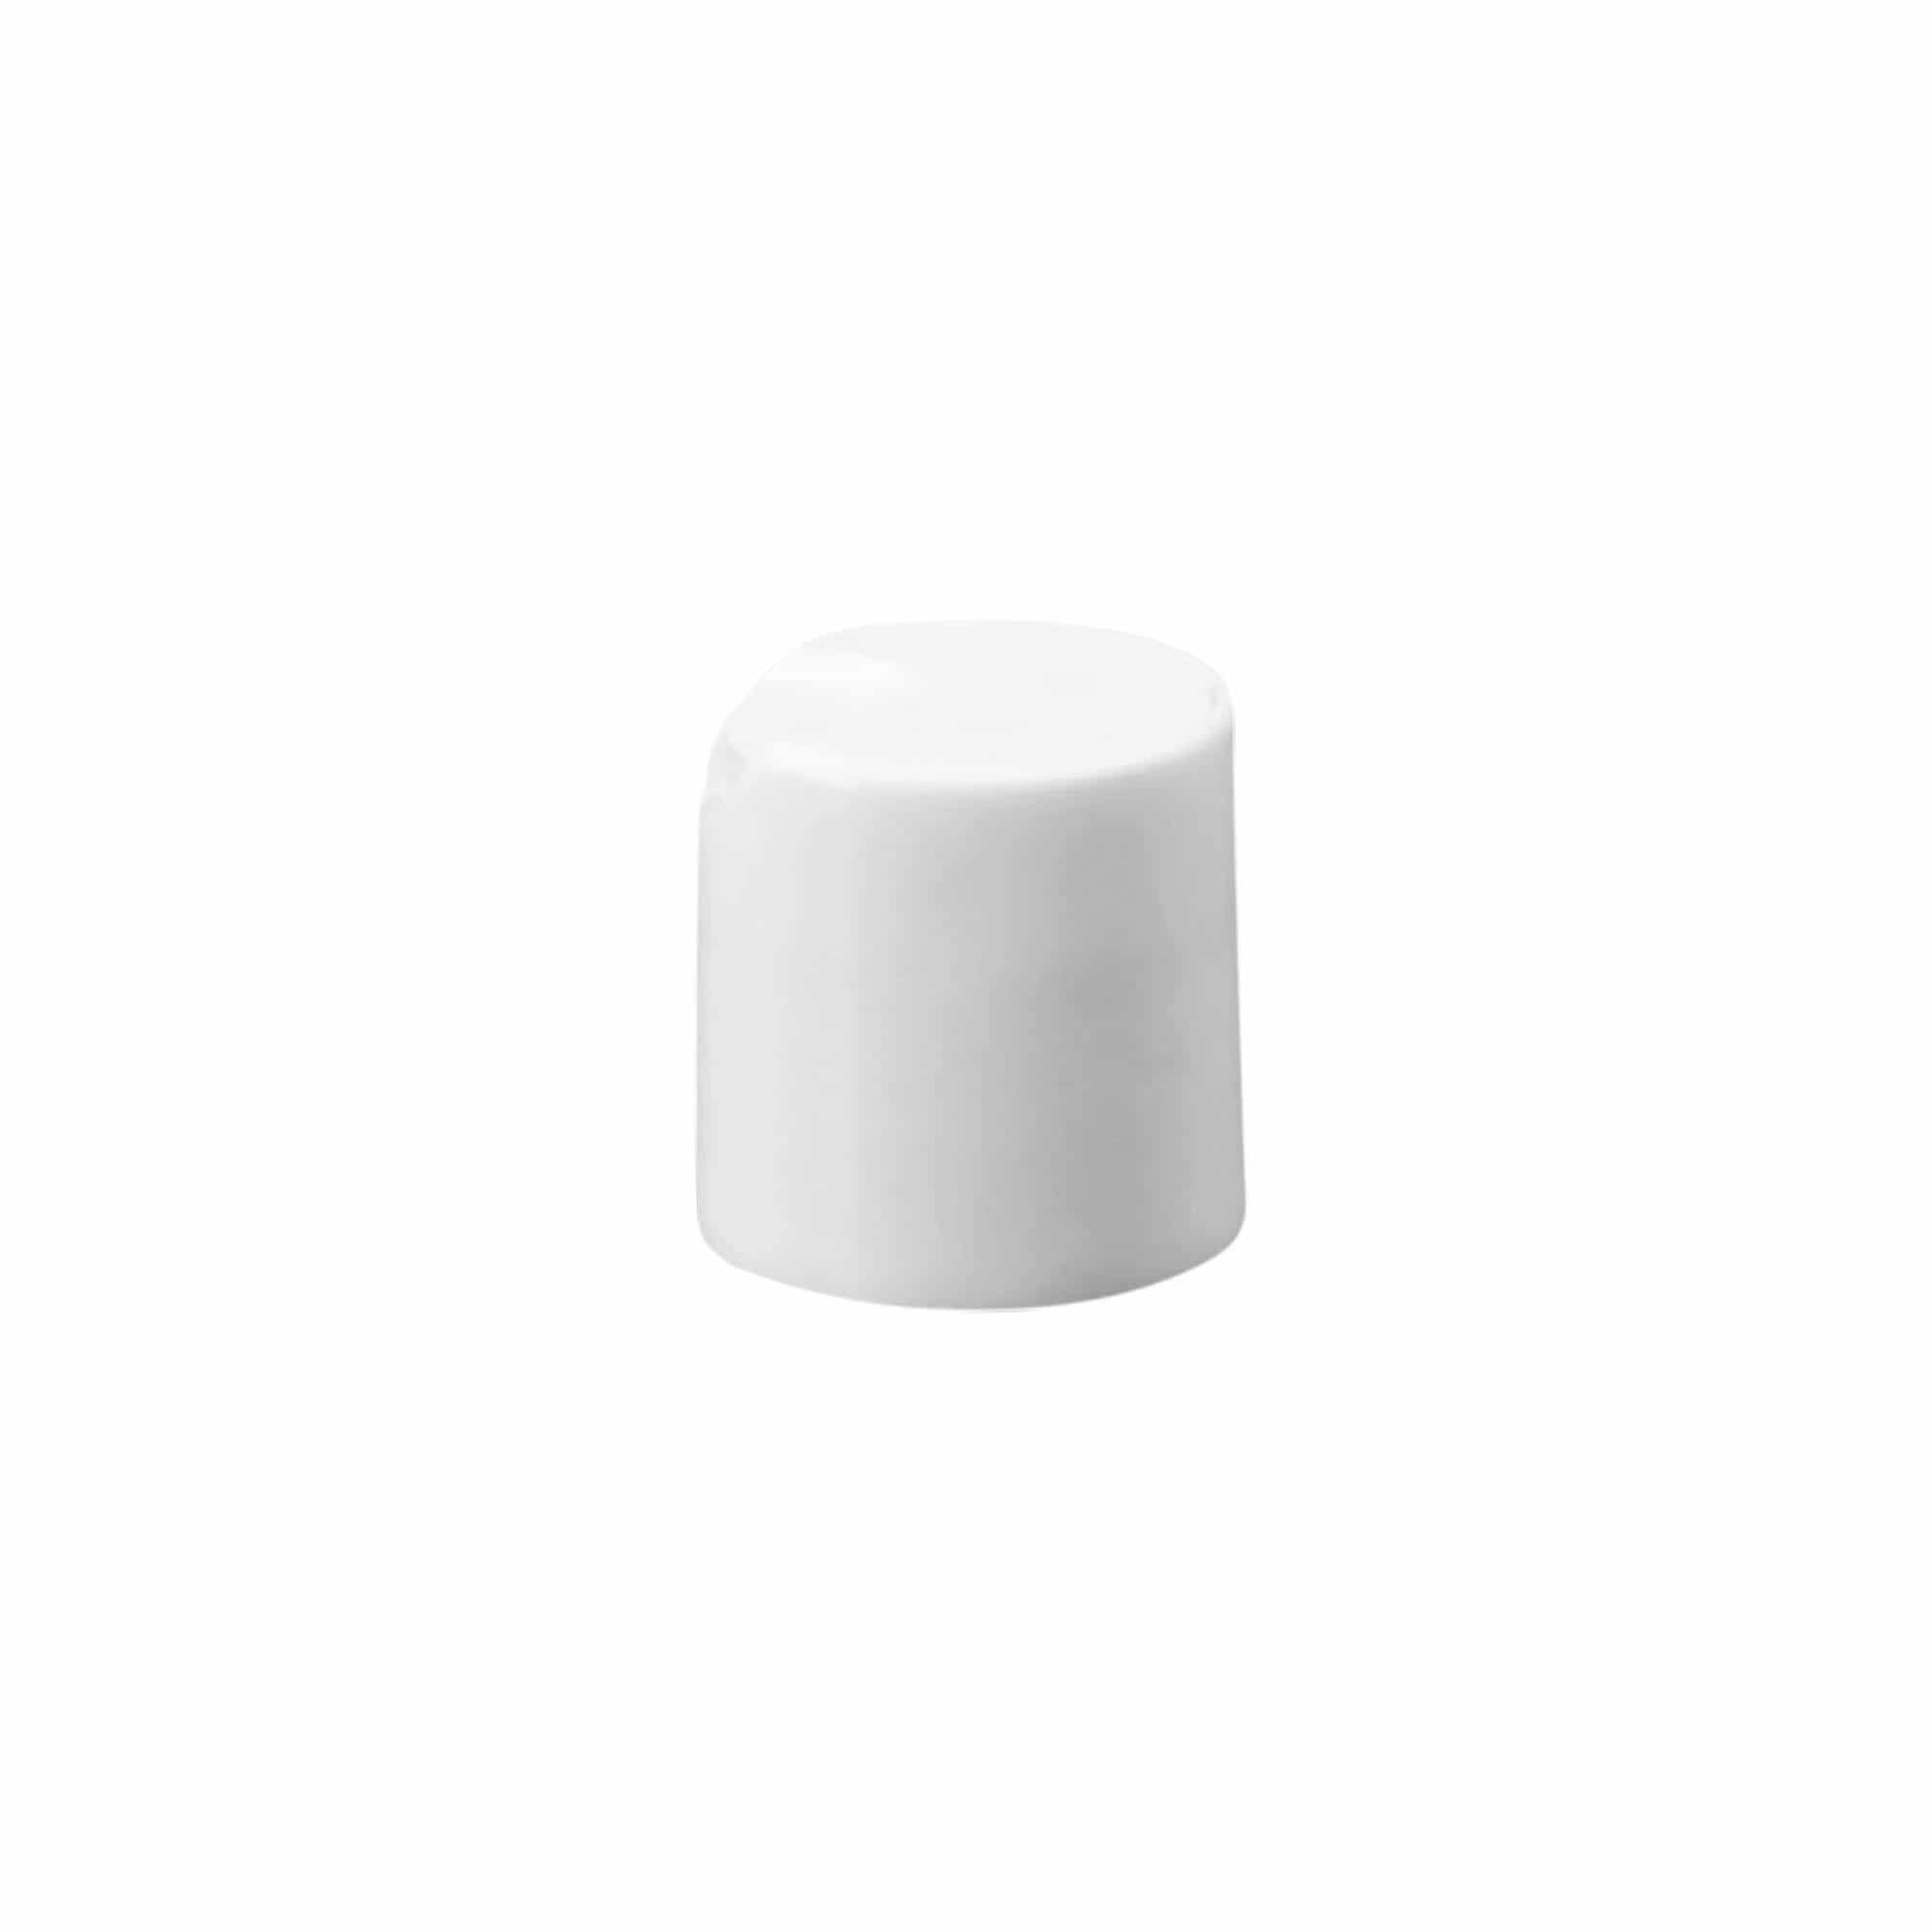 Screw cap with disc top, PP plastic, white, for opening: GPI 20/410